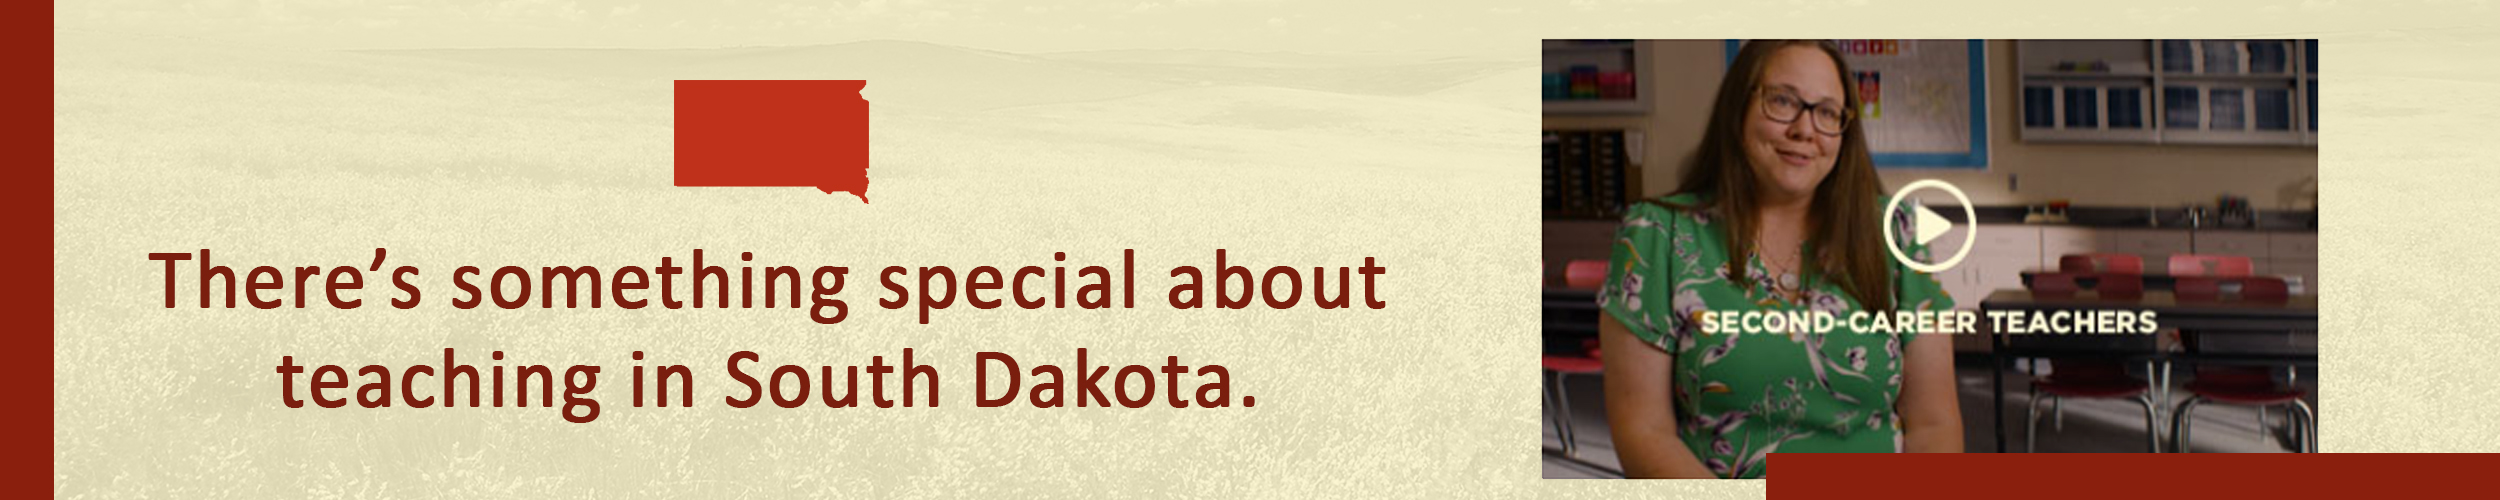 Thereâ€™s something special about teaching in South Dakota. Link to video.